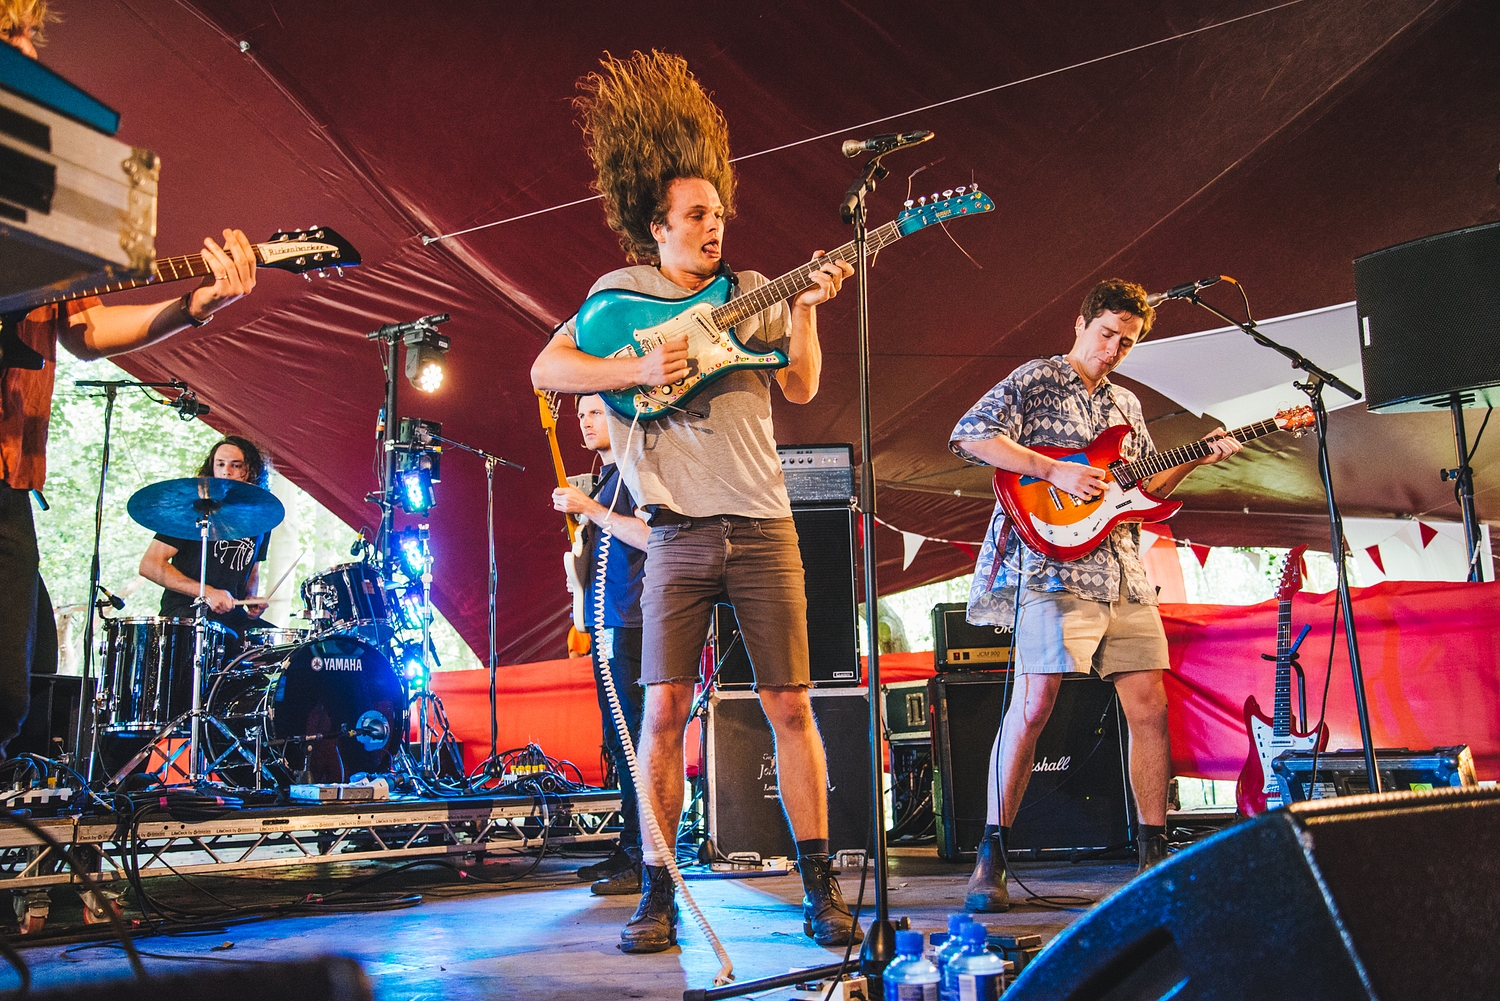 King Gizzard & The Lizard Wizard's vicious psychedelia takes root in the Latitude 2015 woods